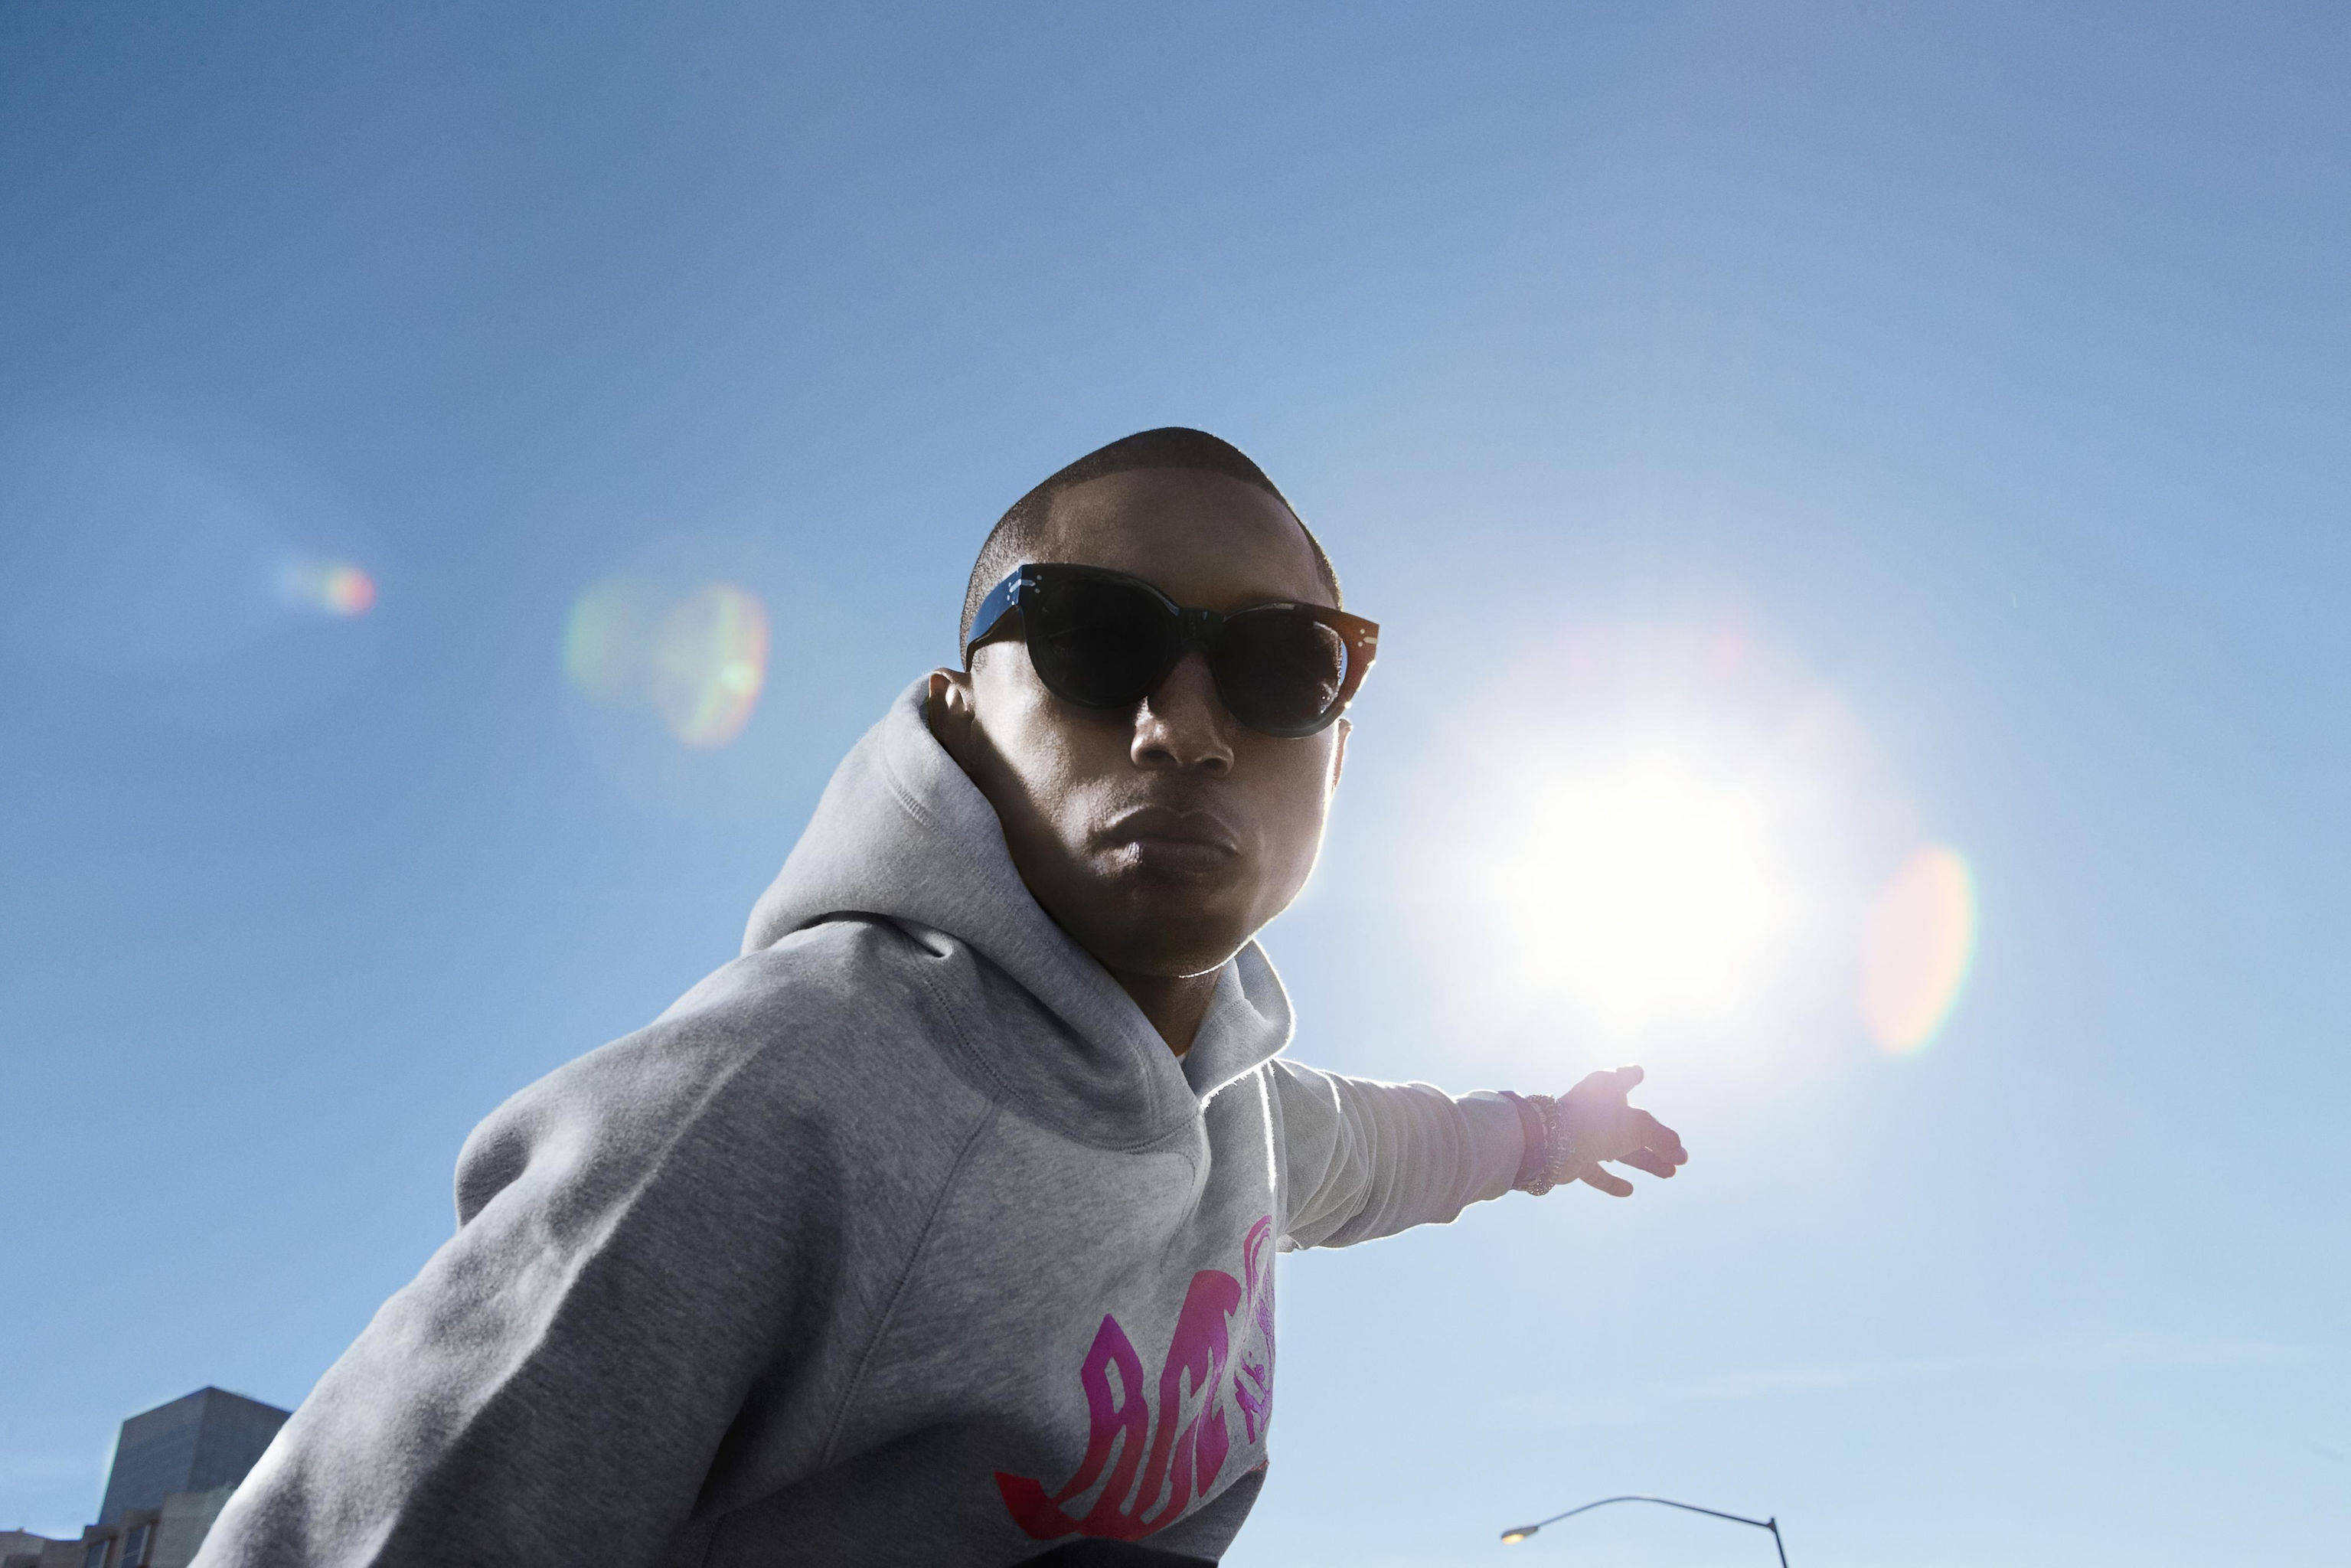 Pharrell Williams Wallpaper Image Photos Pictures